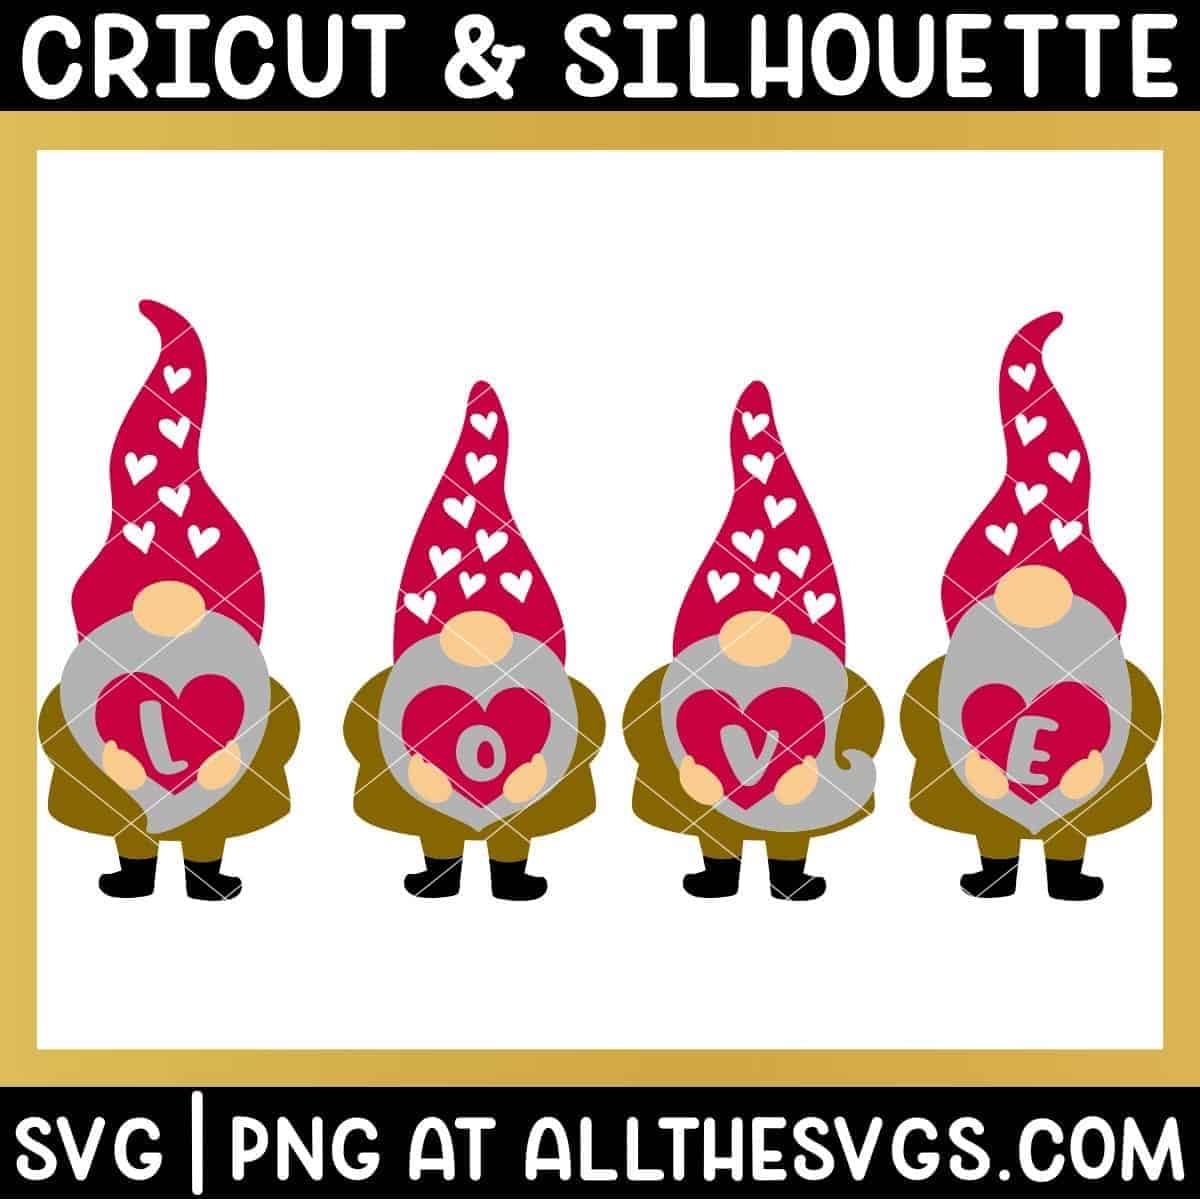 group of 4 valentine gnomes holding hearts to spell out love.